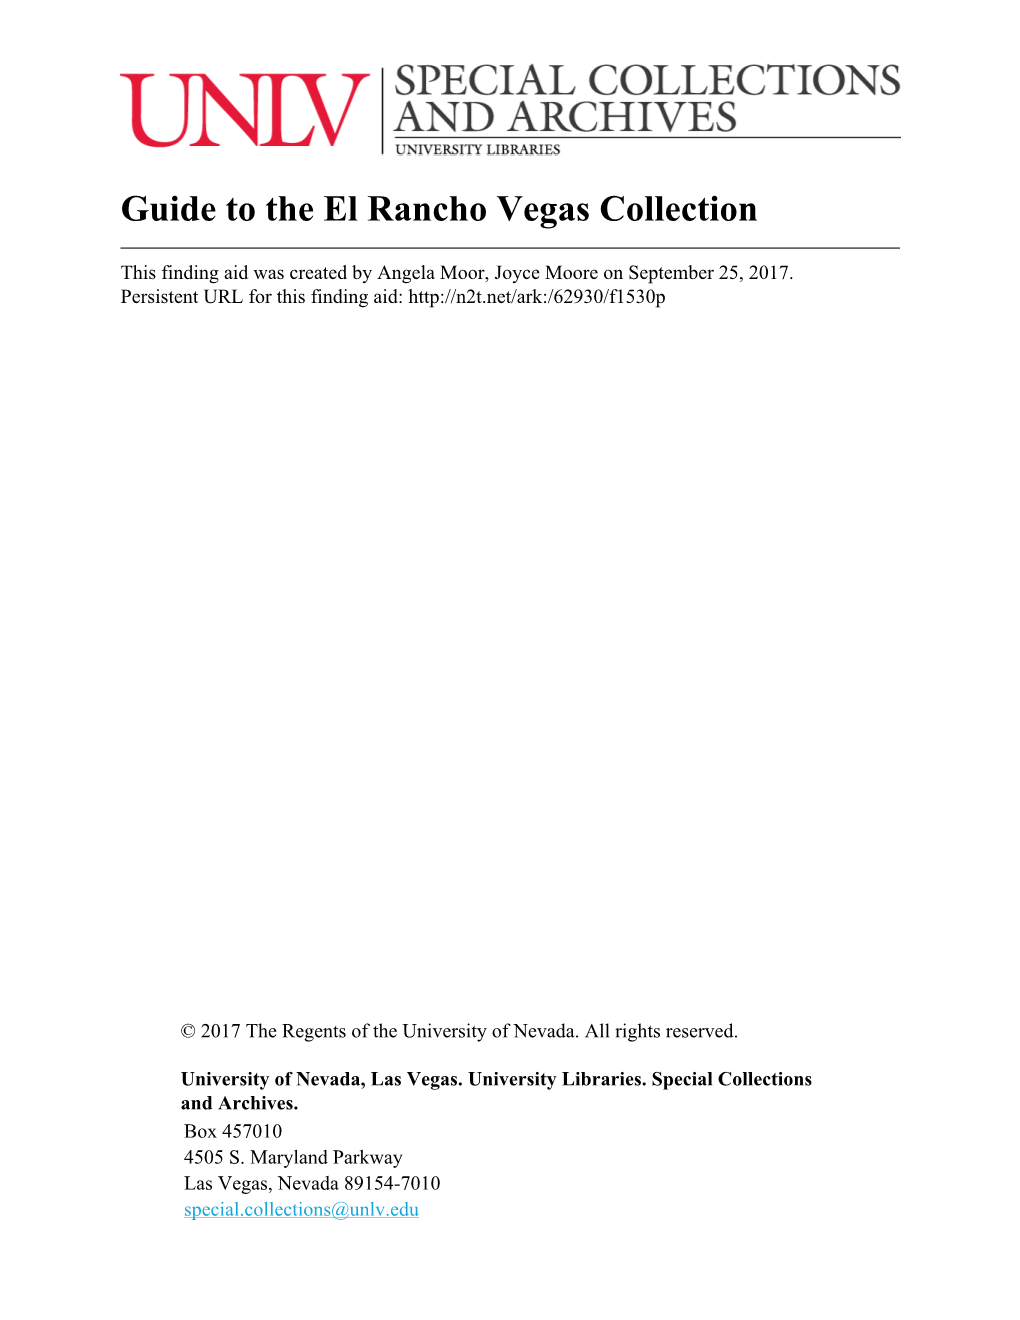 Guide to the El Rancho Vegas Collection